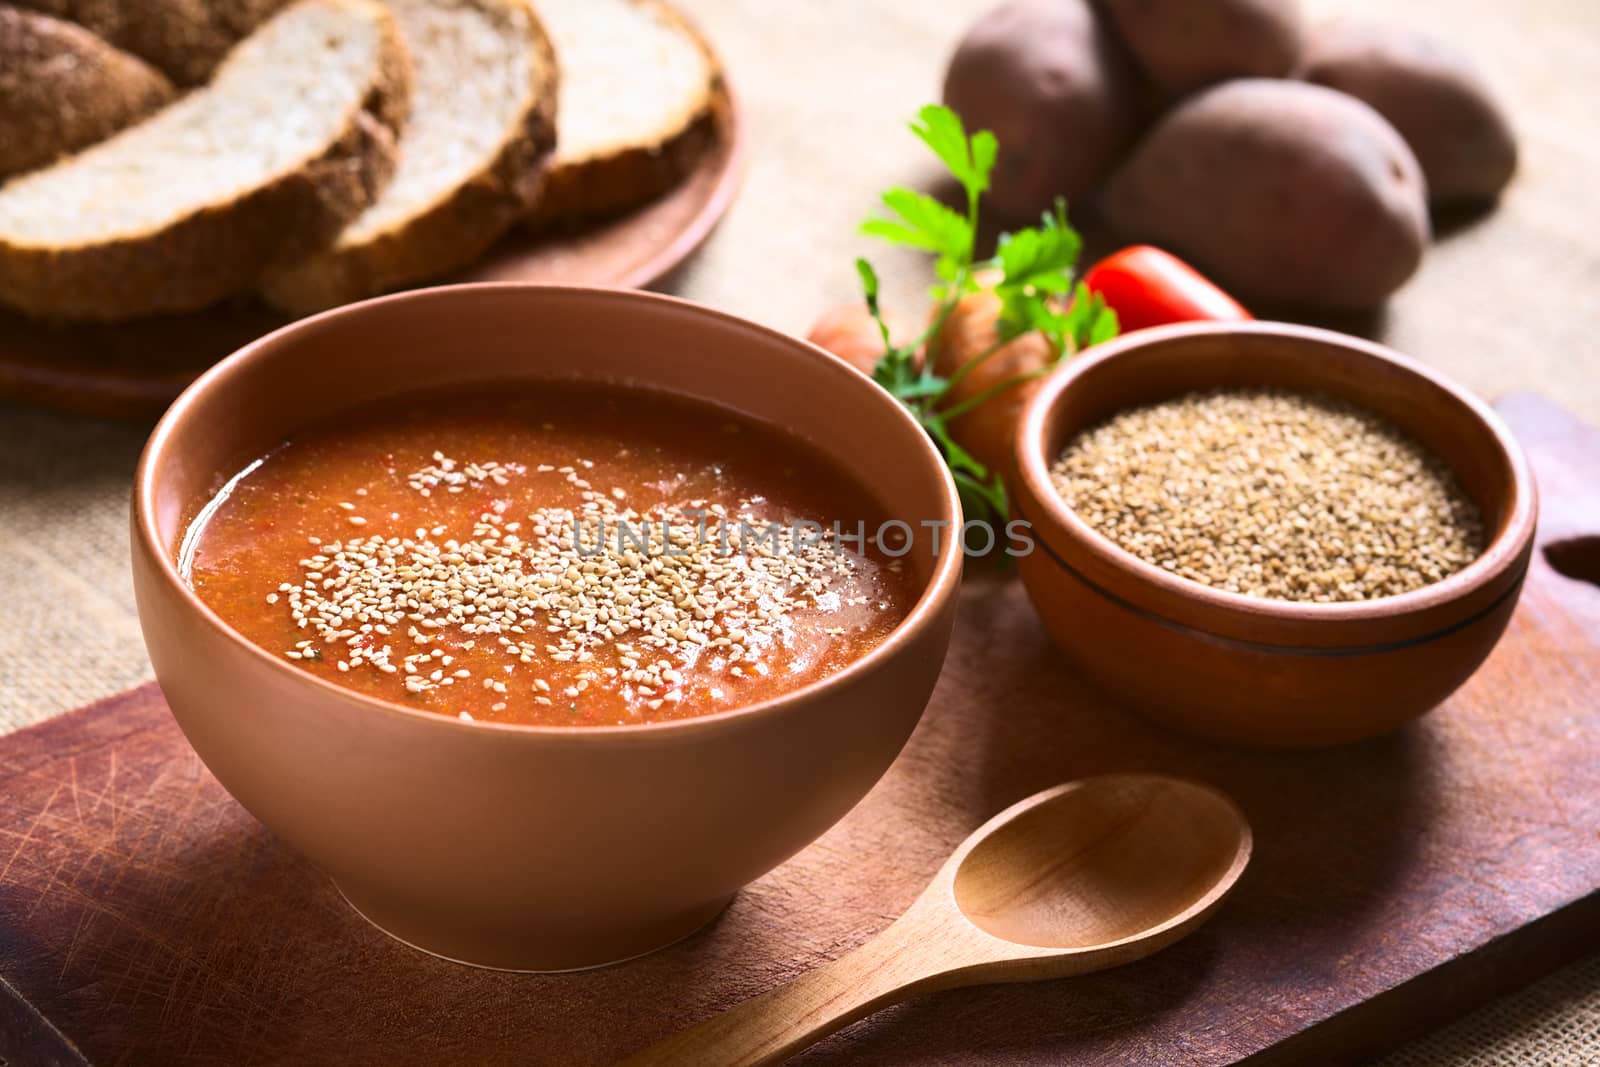 Cream of Vegetable Soup with Sesame Seeds by ildi